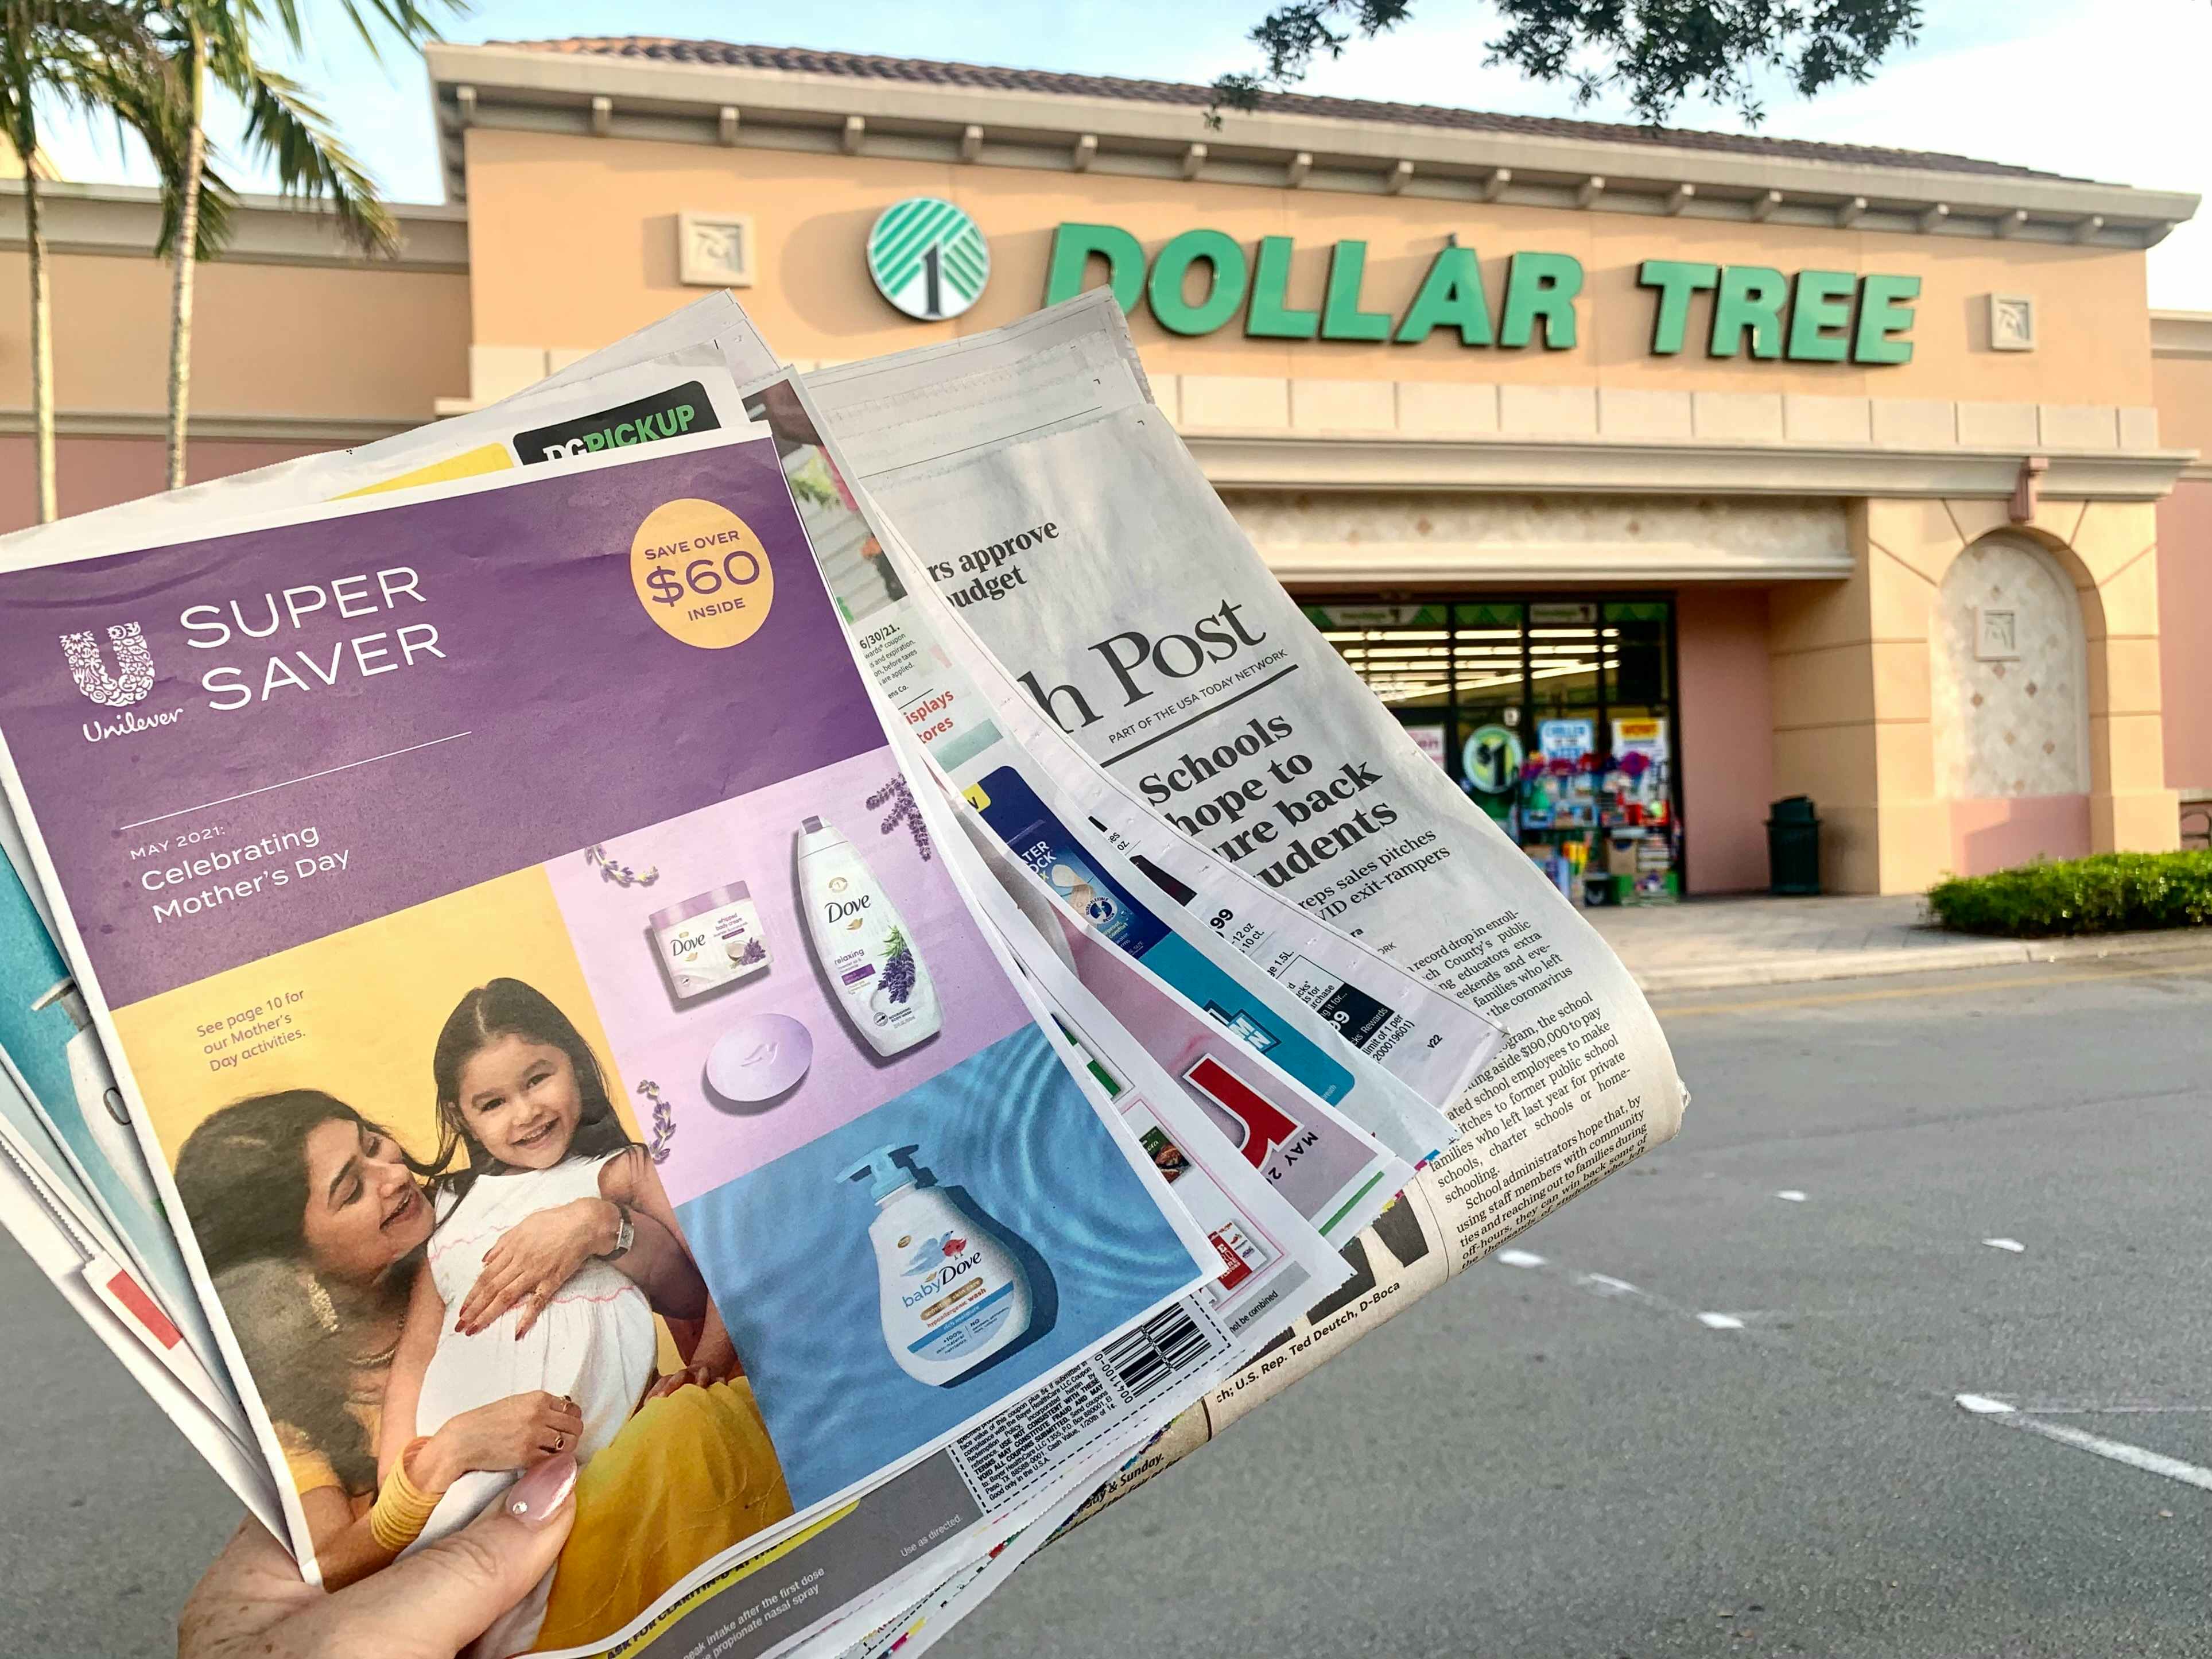 person holding stack of coupon leaflets and newspaper near Dollar Tree storefront